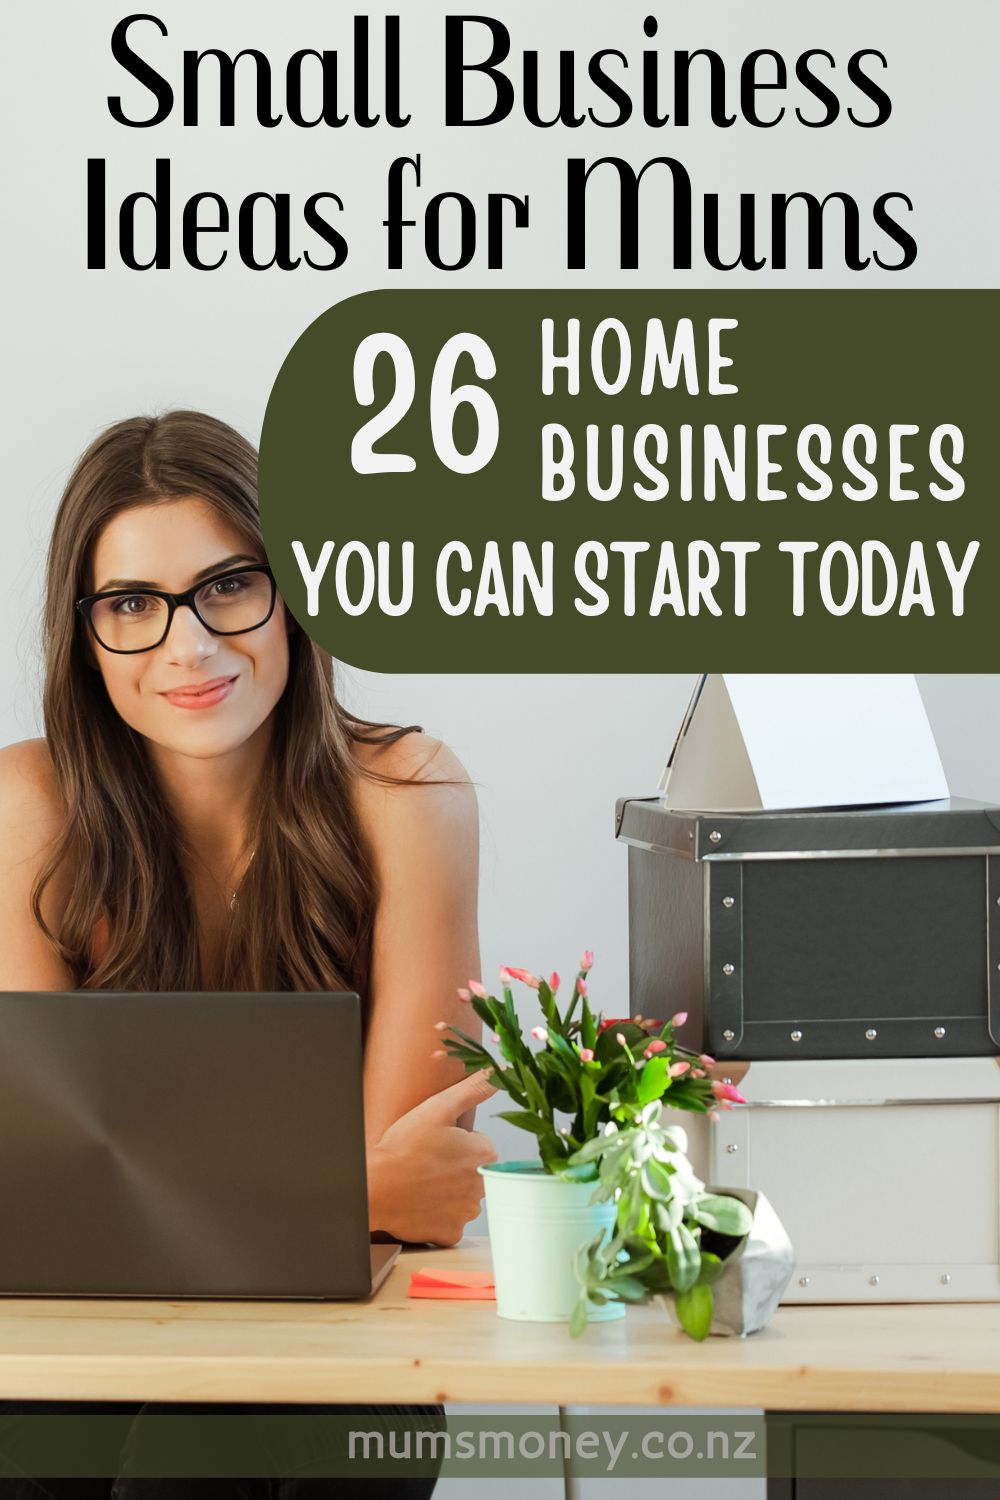 Small Business Ideas for Mums 26 Home Businesses You Can Start Today